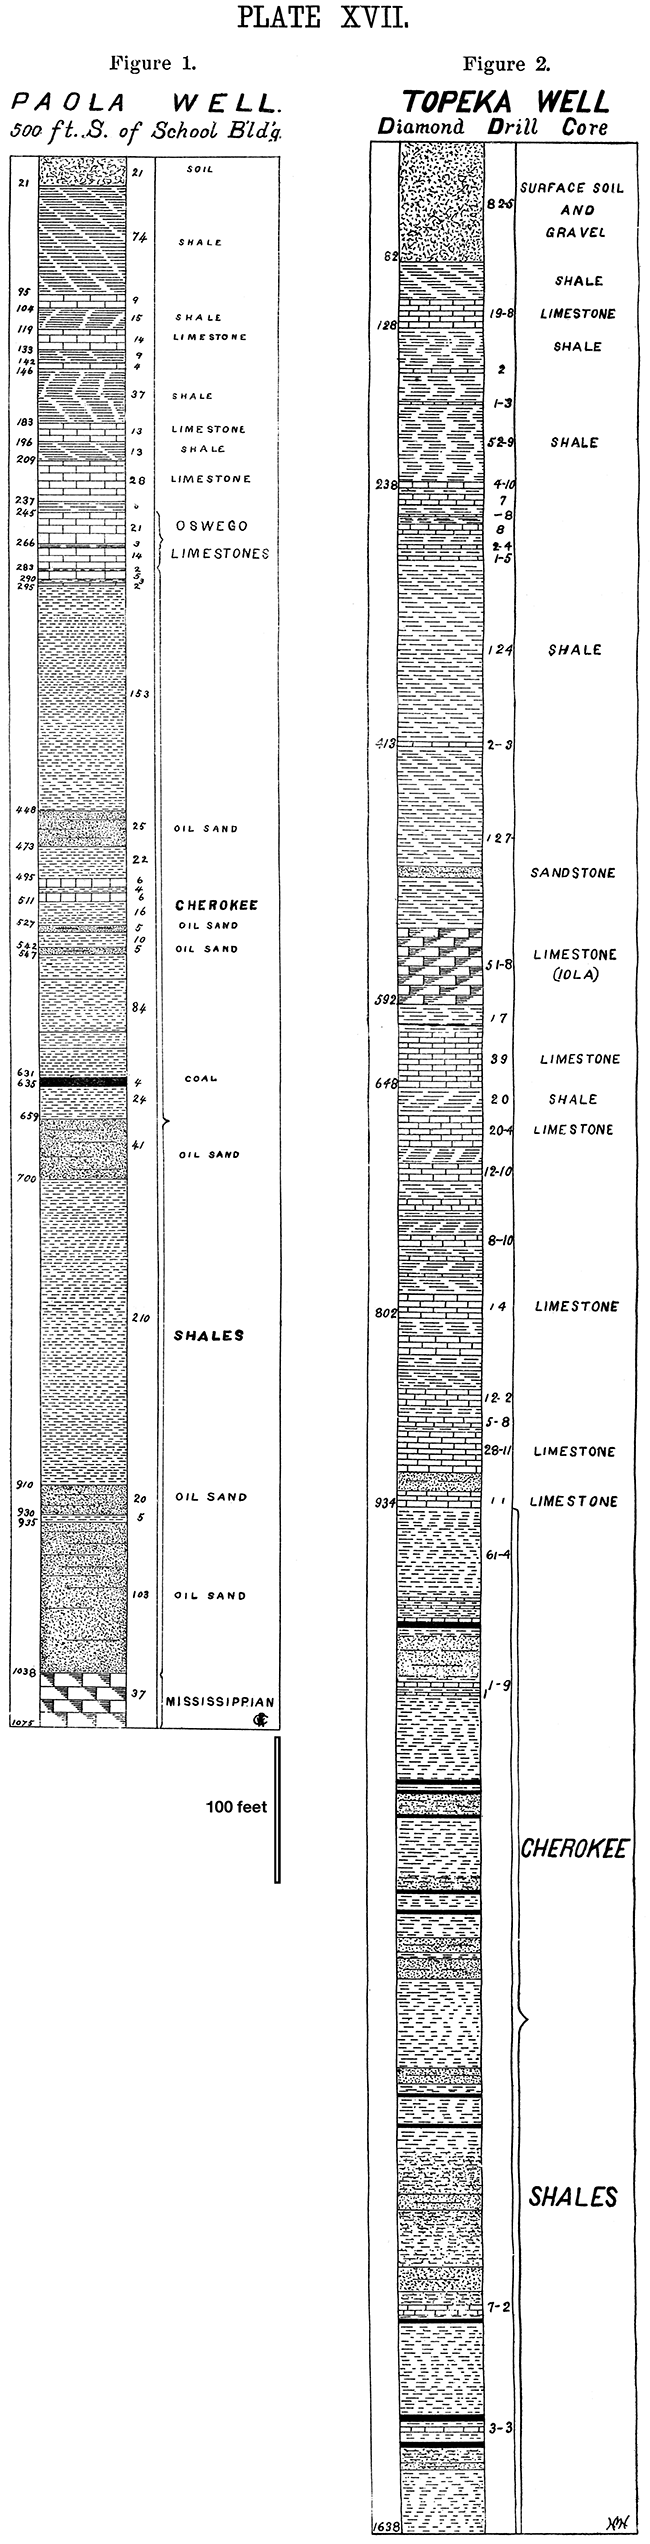 Two stratigraphic columns from the Paola and Topeka wells.